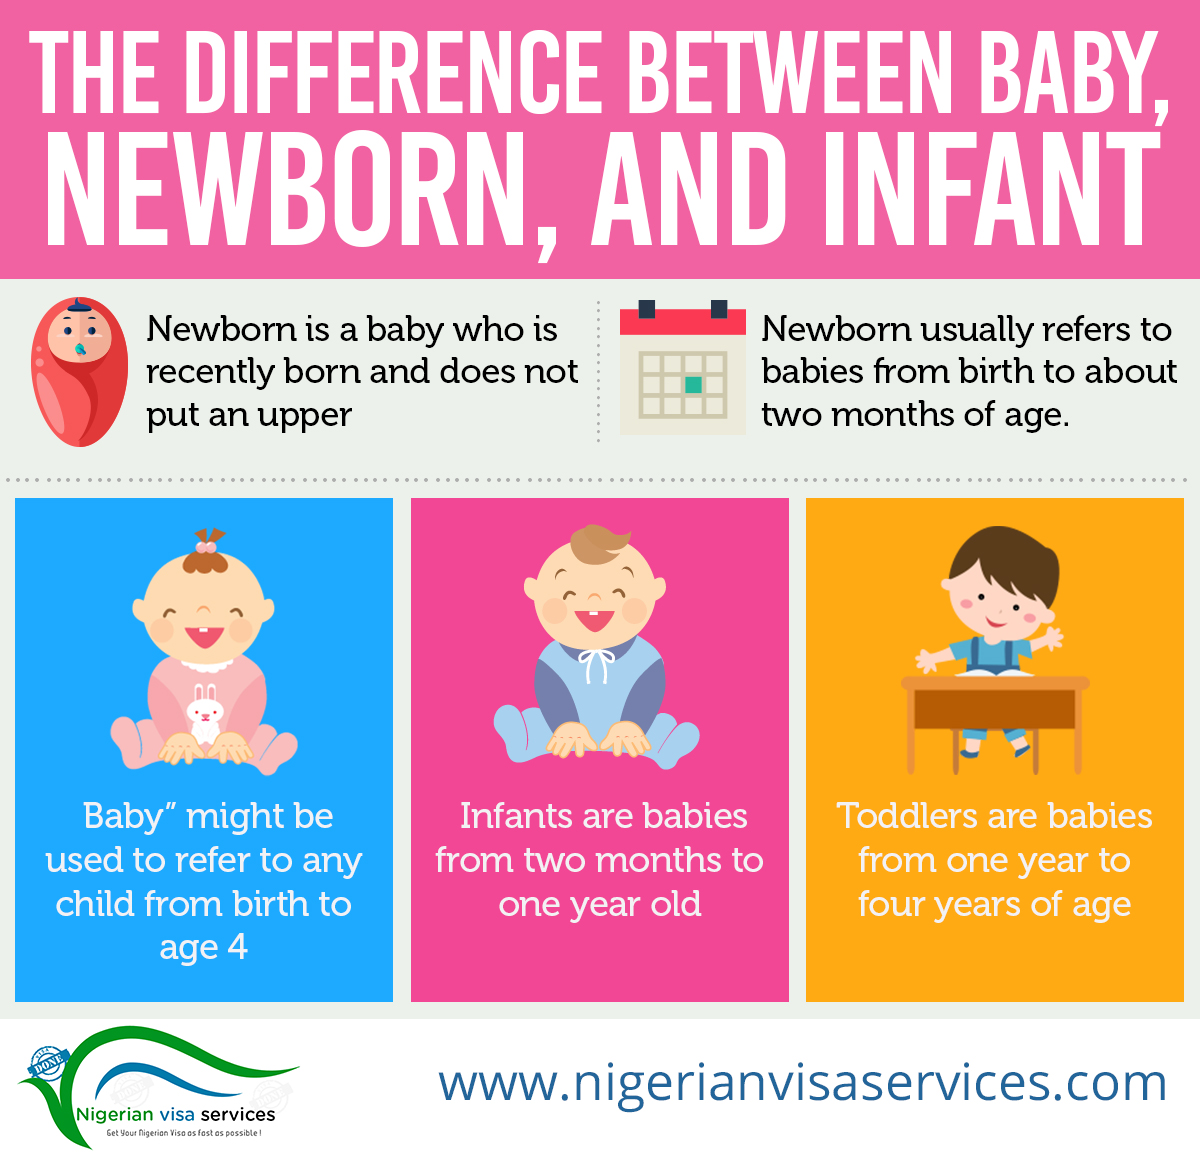 Baby, Newborn, And Infant